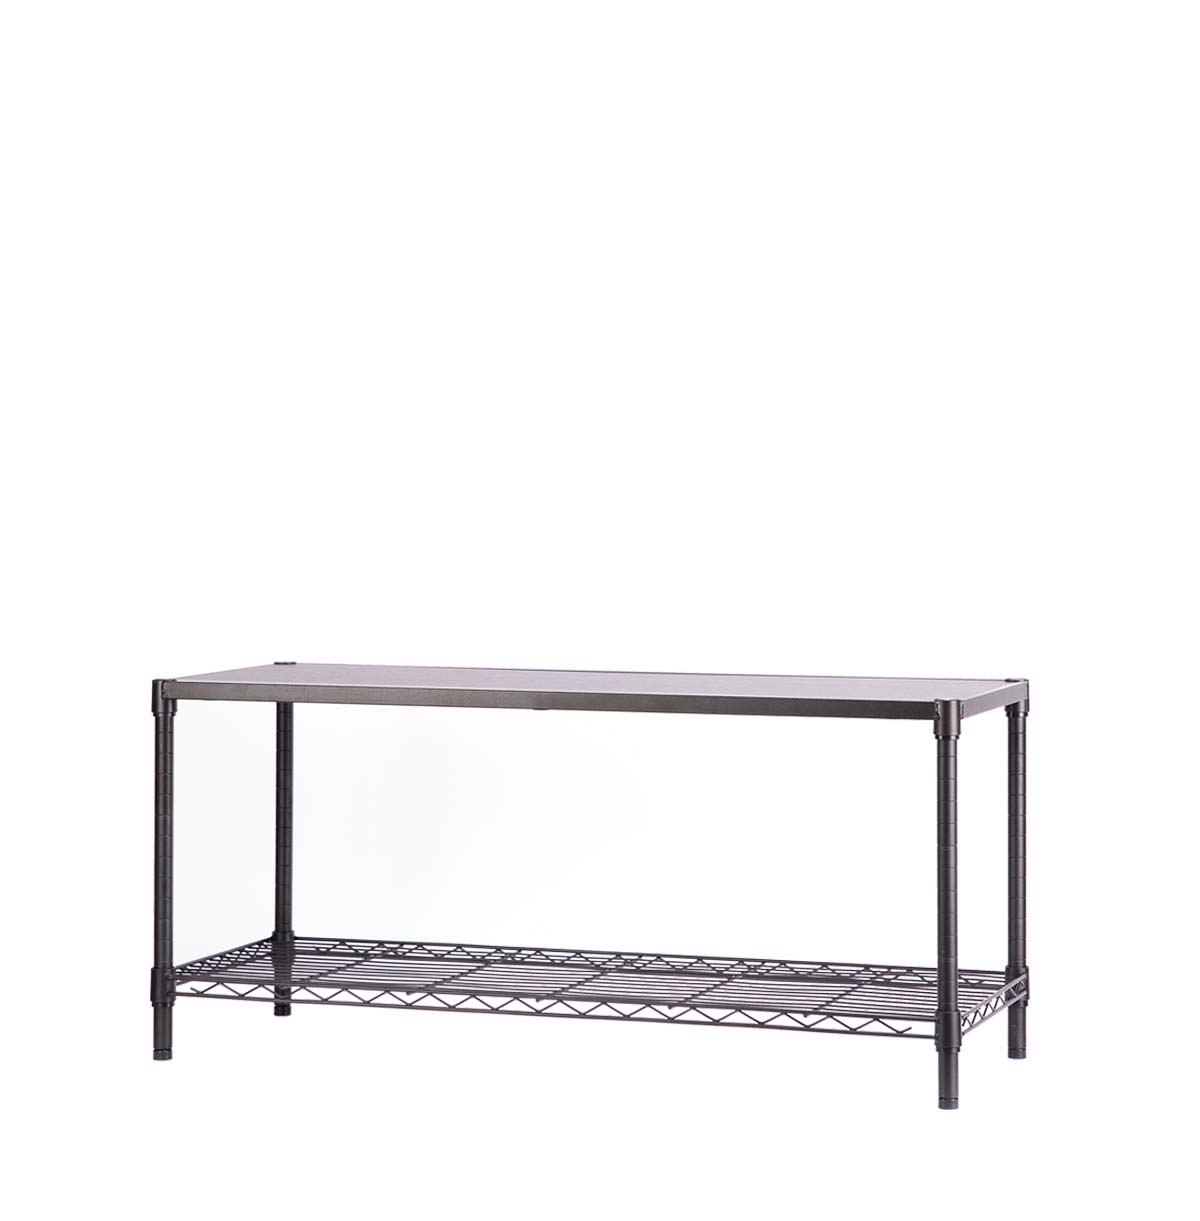 2-Tier Metal TV Stand / Entertainment Center / TV Console Table For Living Room / Bedroom